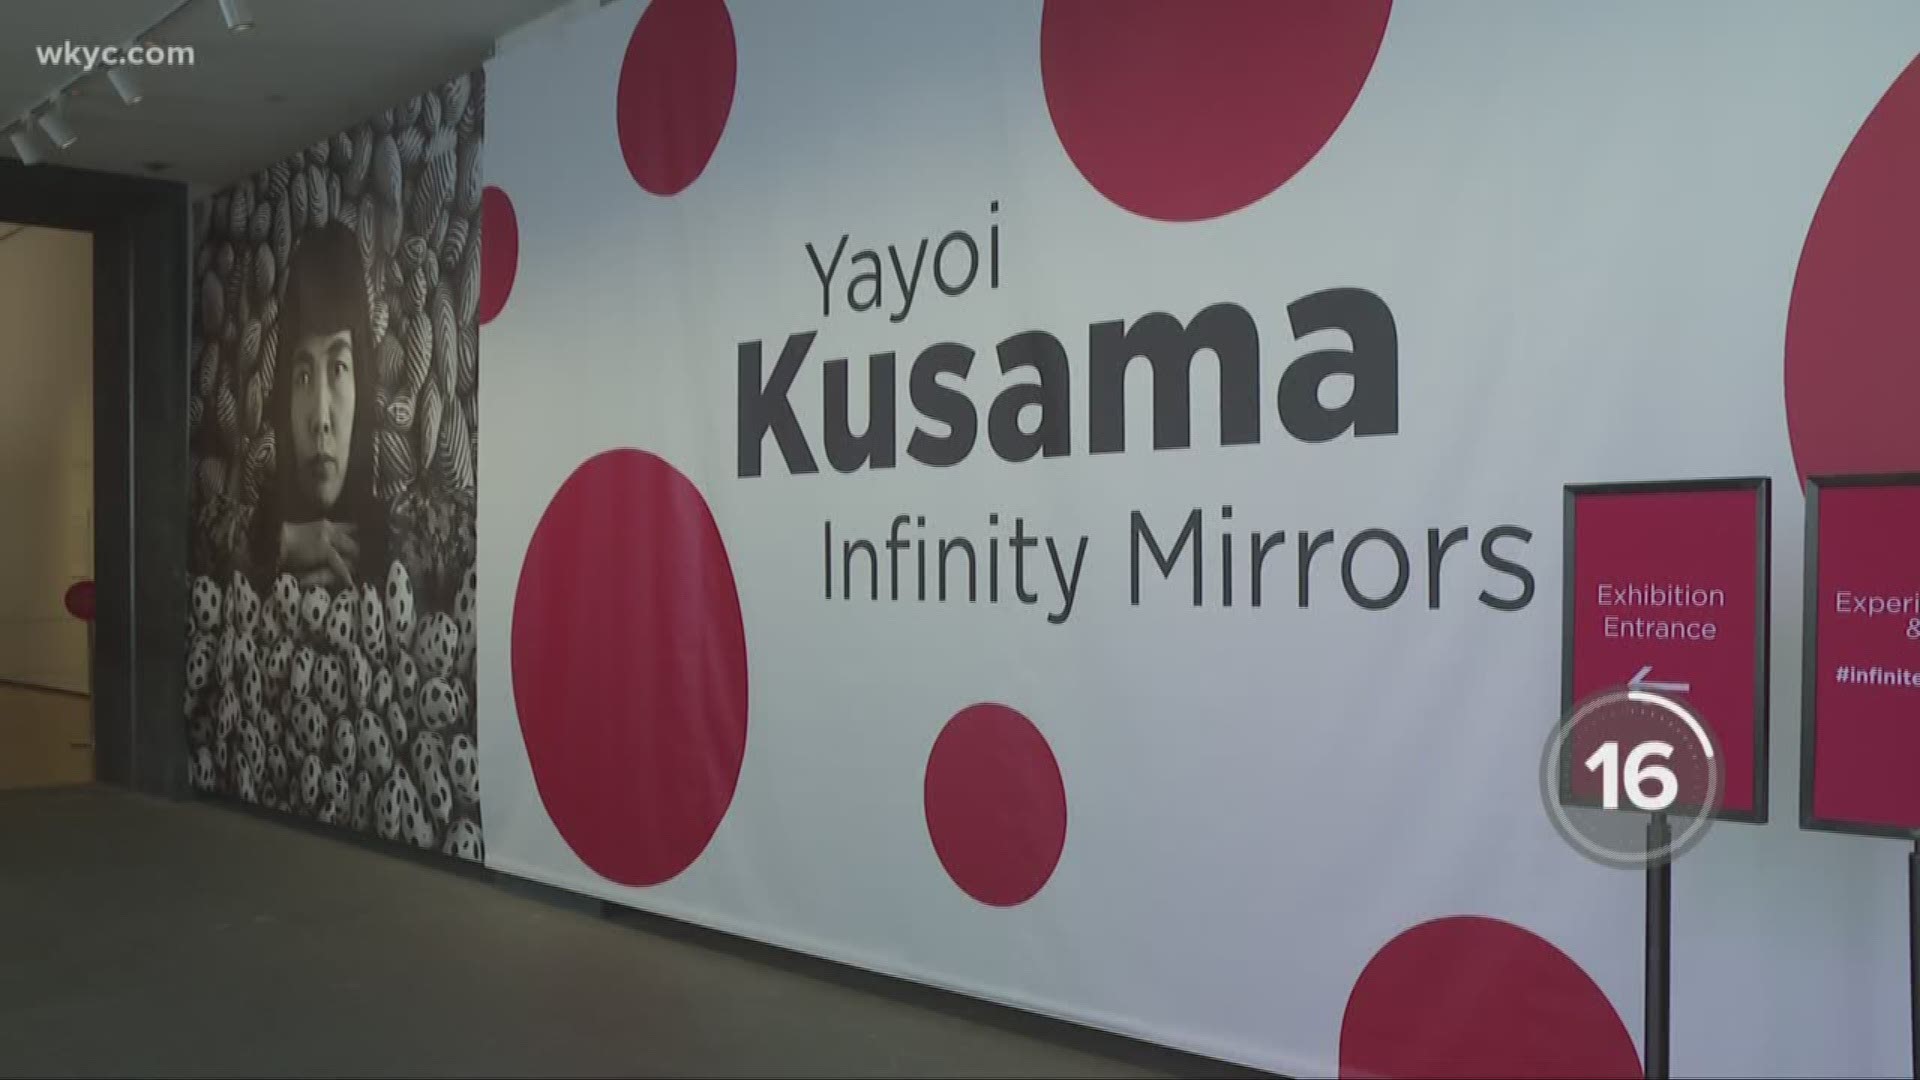 Infinity Mirrors exhibit at Cleveland Museum of Art drew more than 300,000